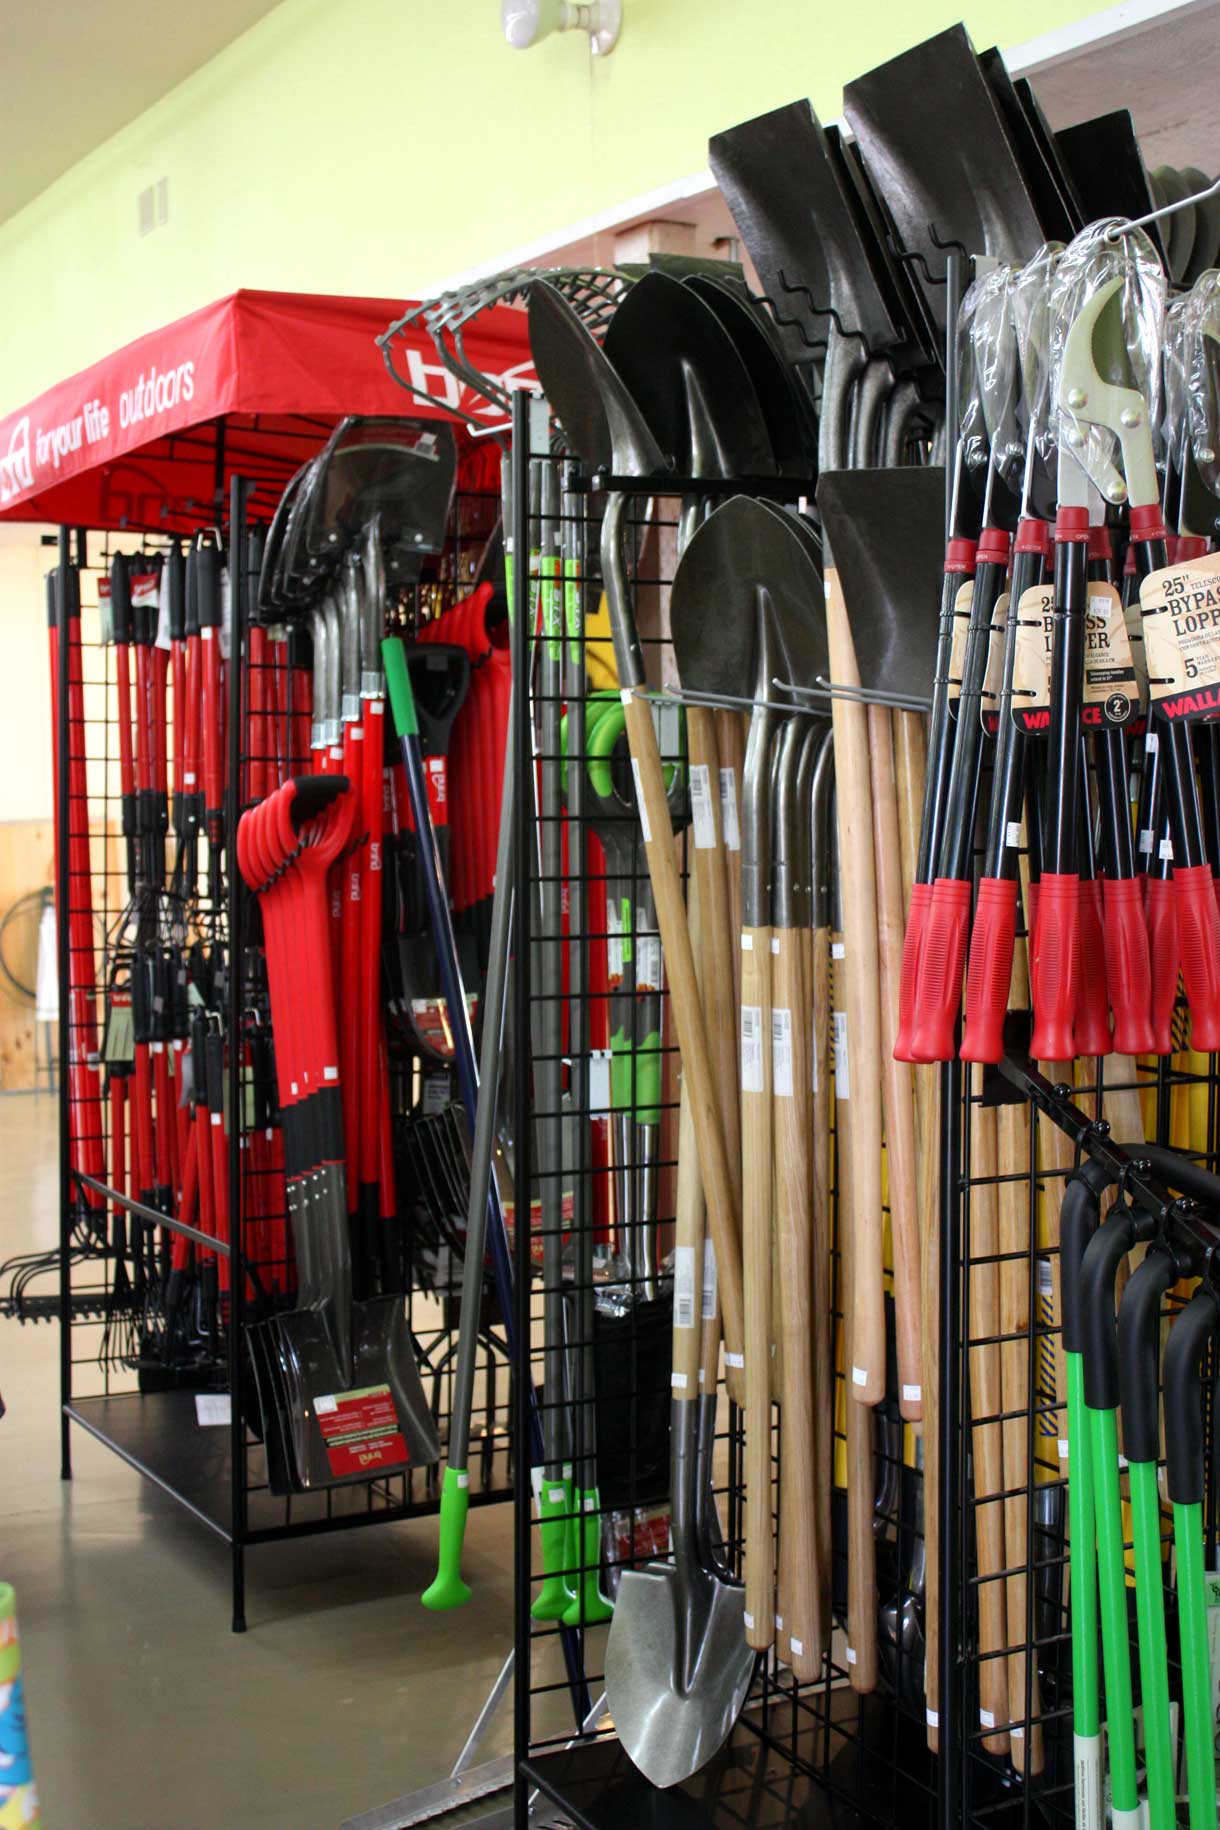 A wall full of hanging shovels and other tools, all part of the large selection of garden supplies at Bark & Garden Center.